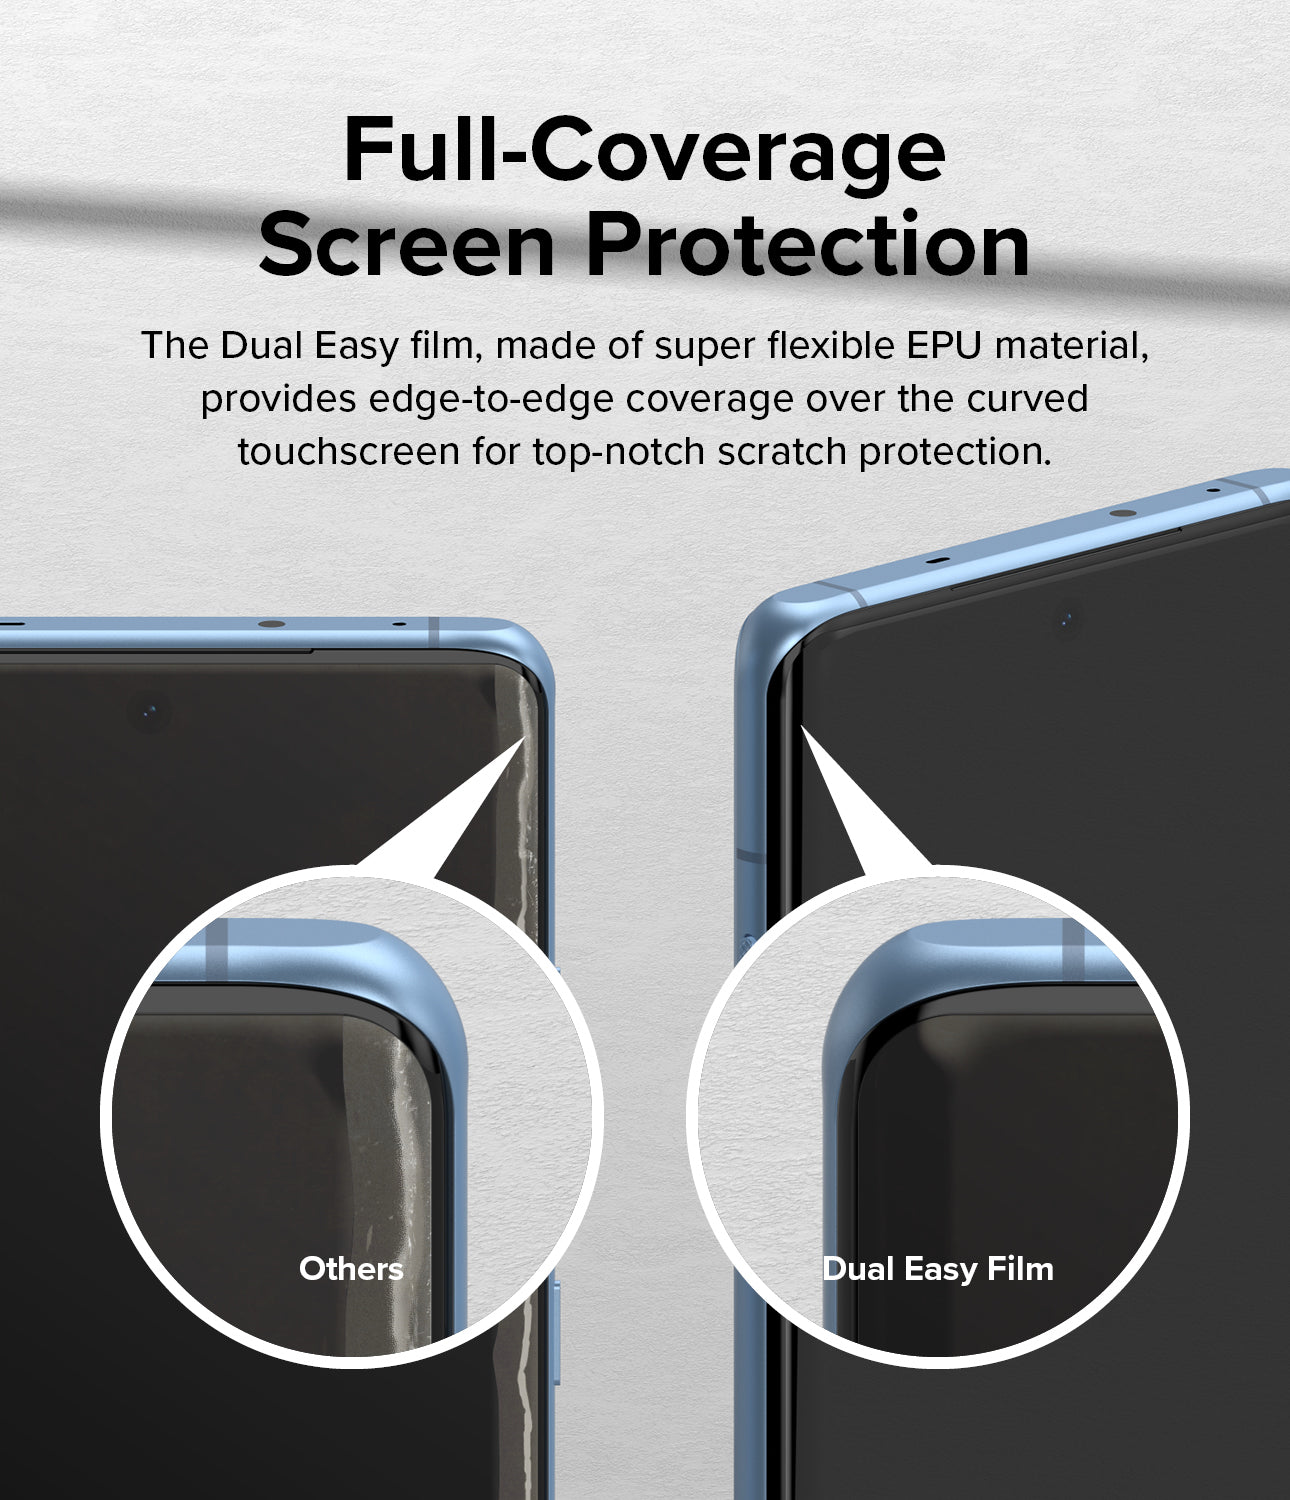 OnePlus 12R Screen Protector | Dual Easy Film - Full Coverage Screen Protection. The Dual Easy Film, made of super flexible EPU material, provides edge-to-edge coverage over the curved touchscreen for top-notch scratch protection